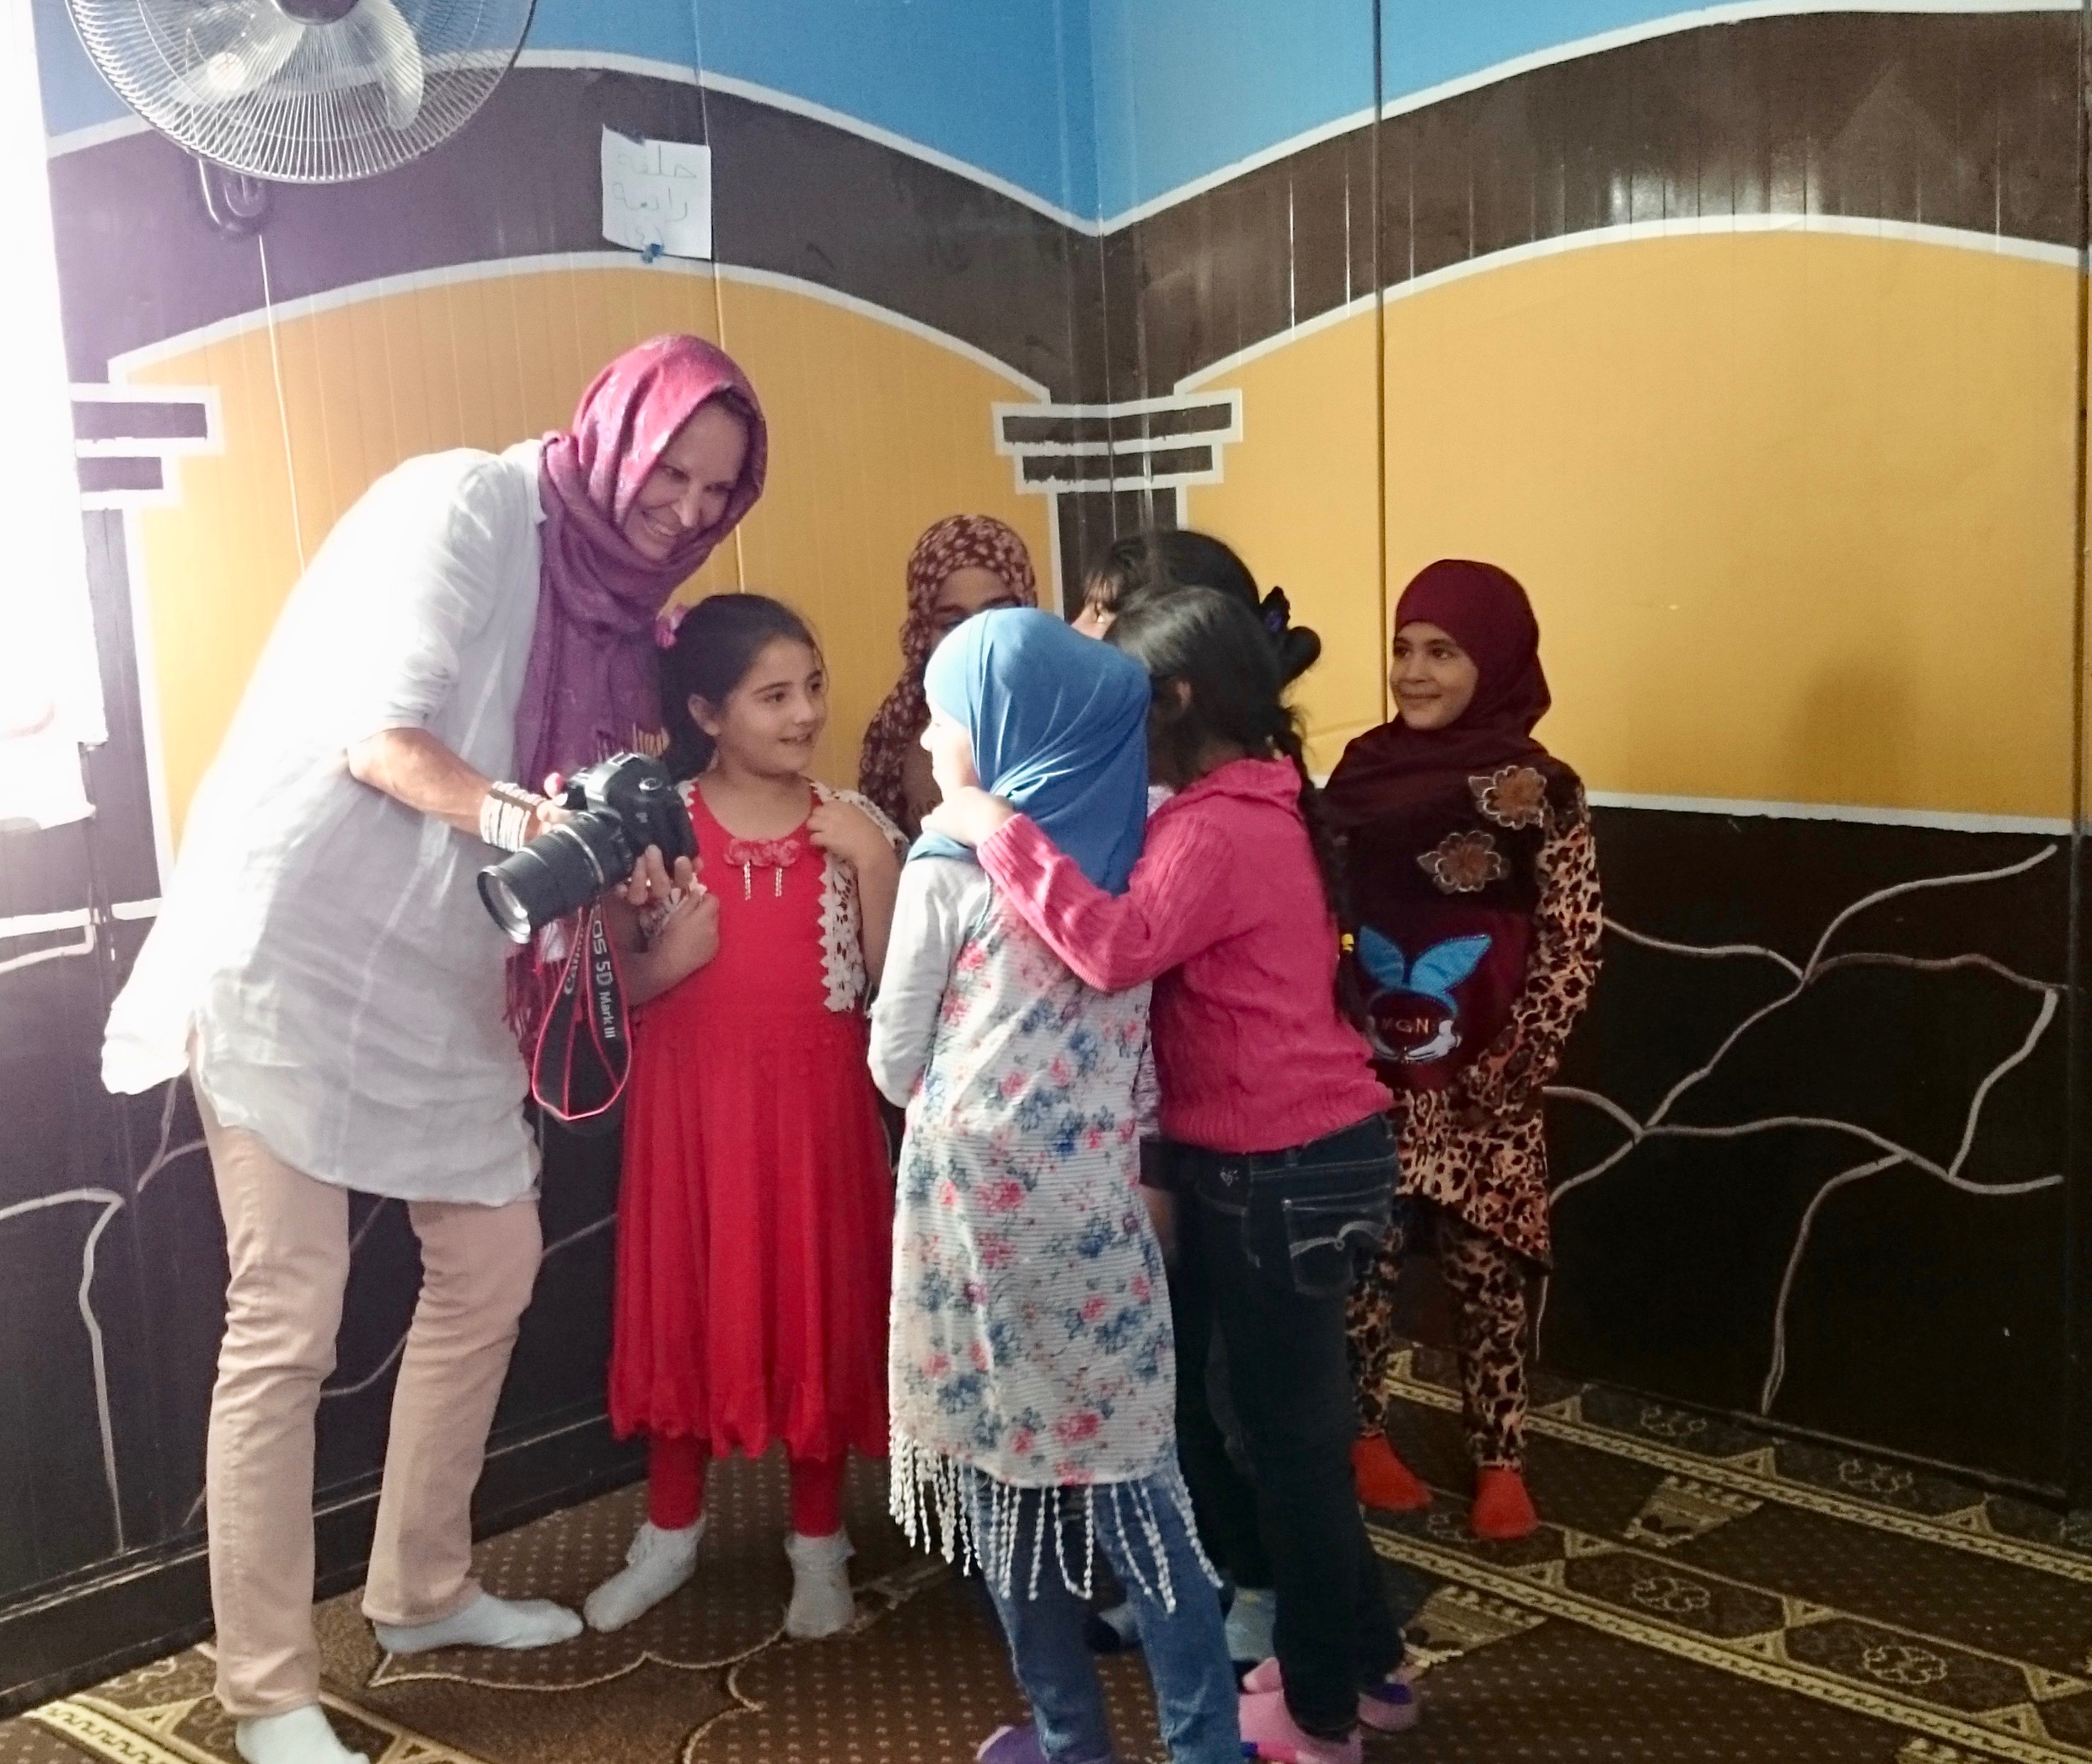 Sharing photos with young girls in the mosque in Village 6